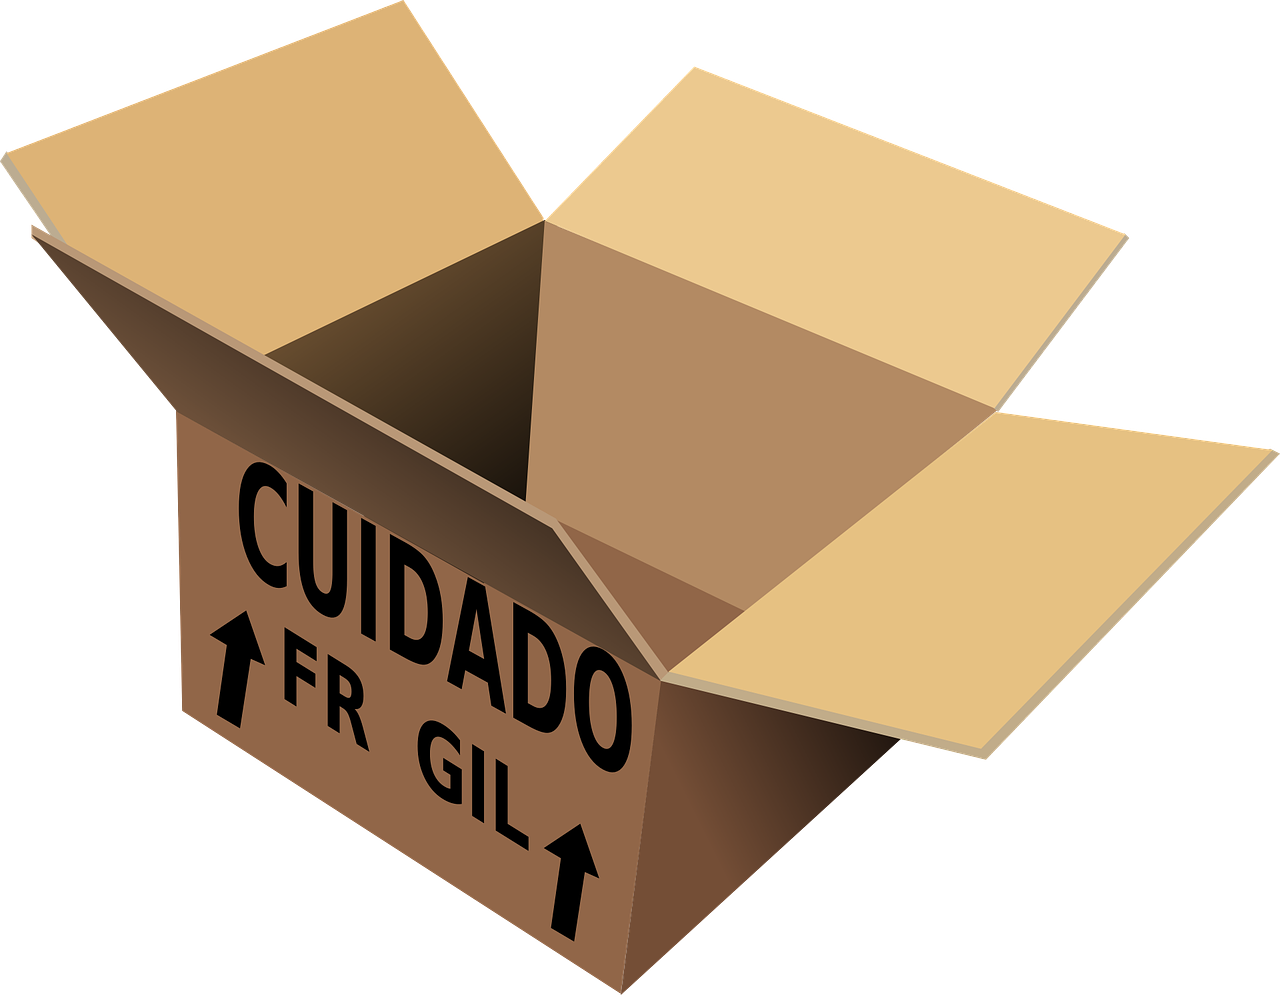 container,open,box,fragile,crate,cardboard,packaging,free vector graphics,free pictures, free photos, free images, royalty free, free illustrations, public domain